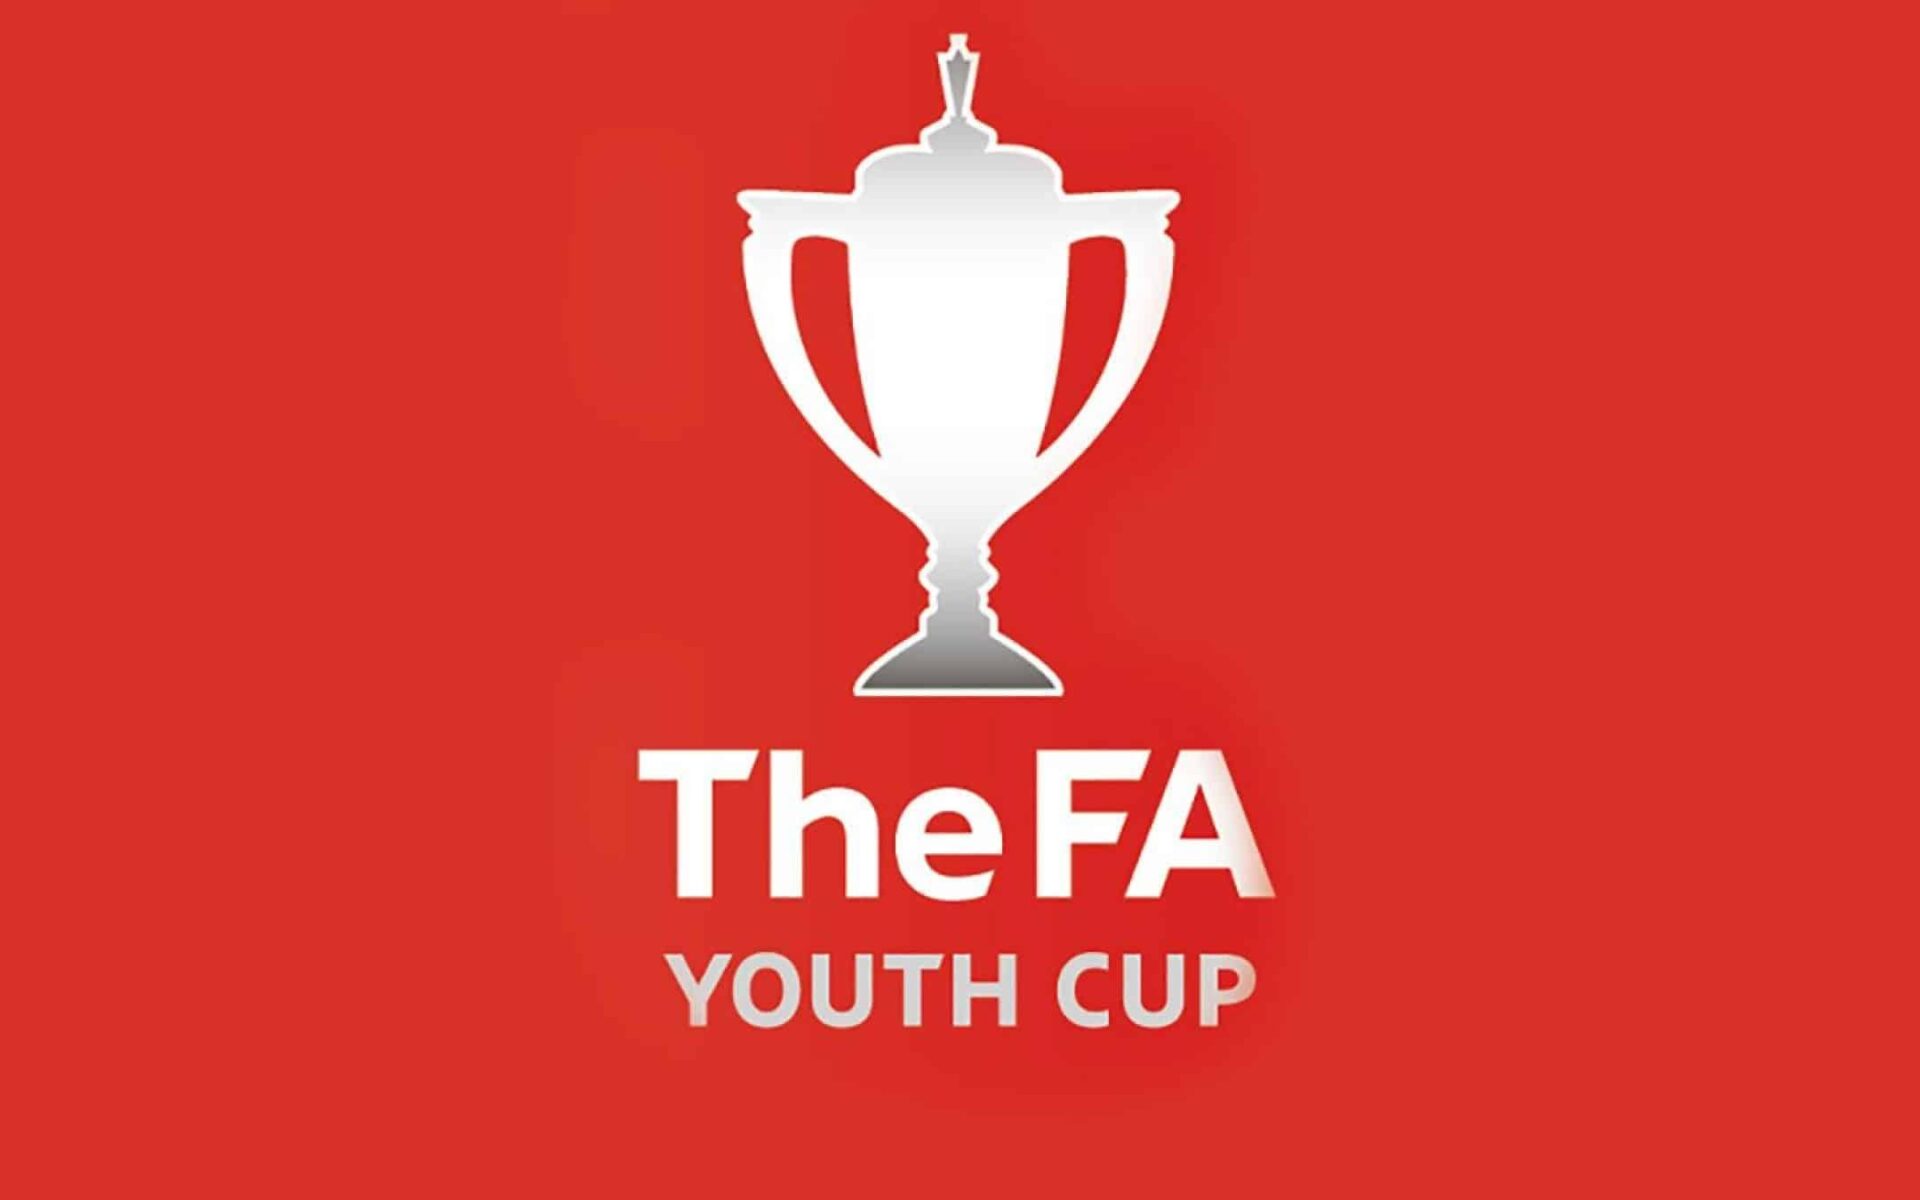 FA Youth Cup: Announcement Featured Image